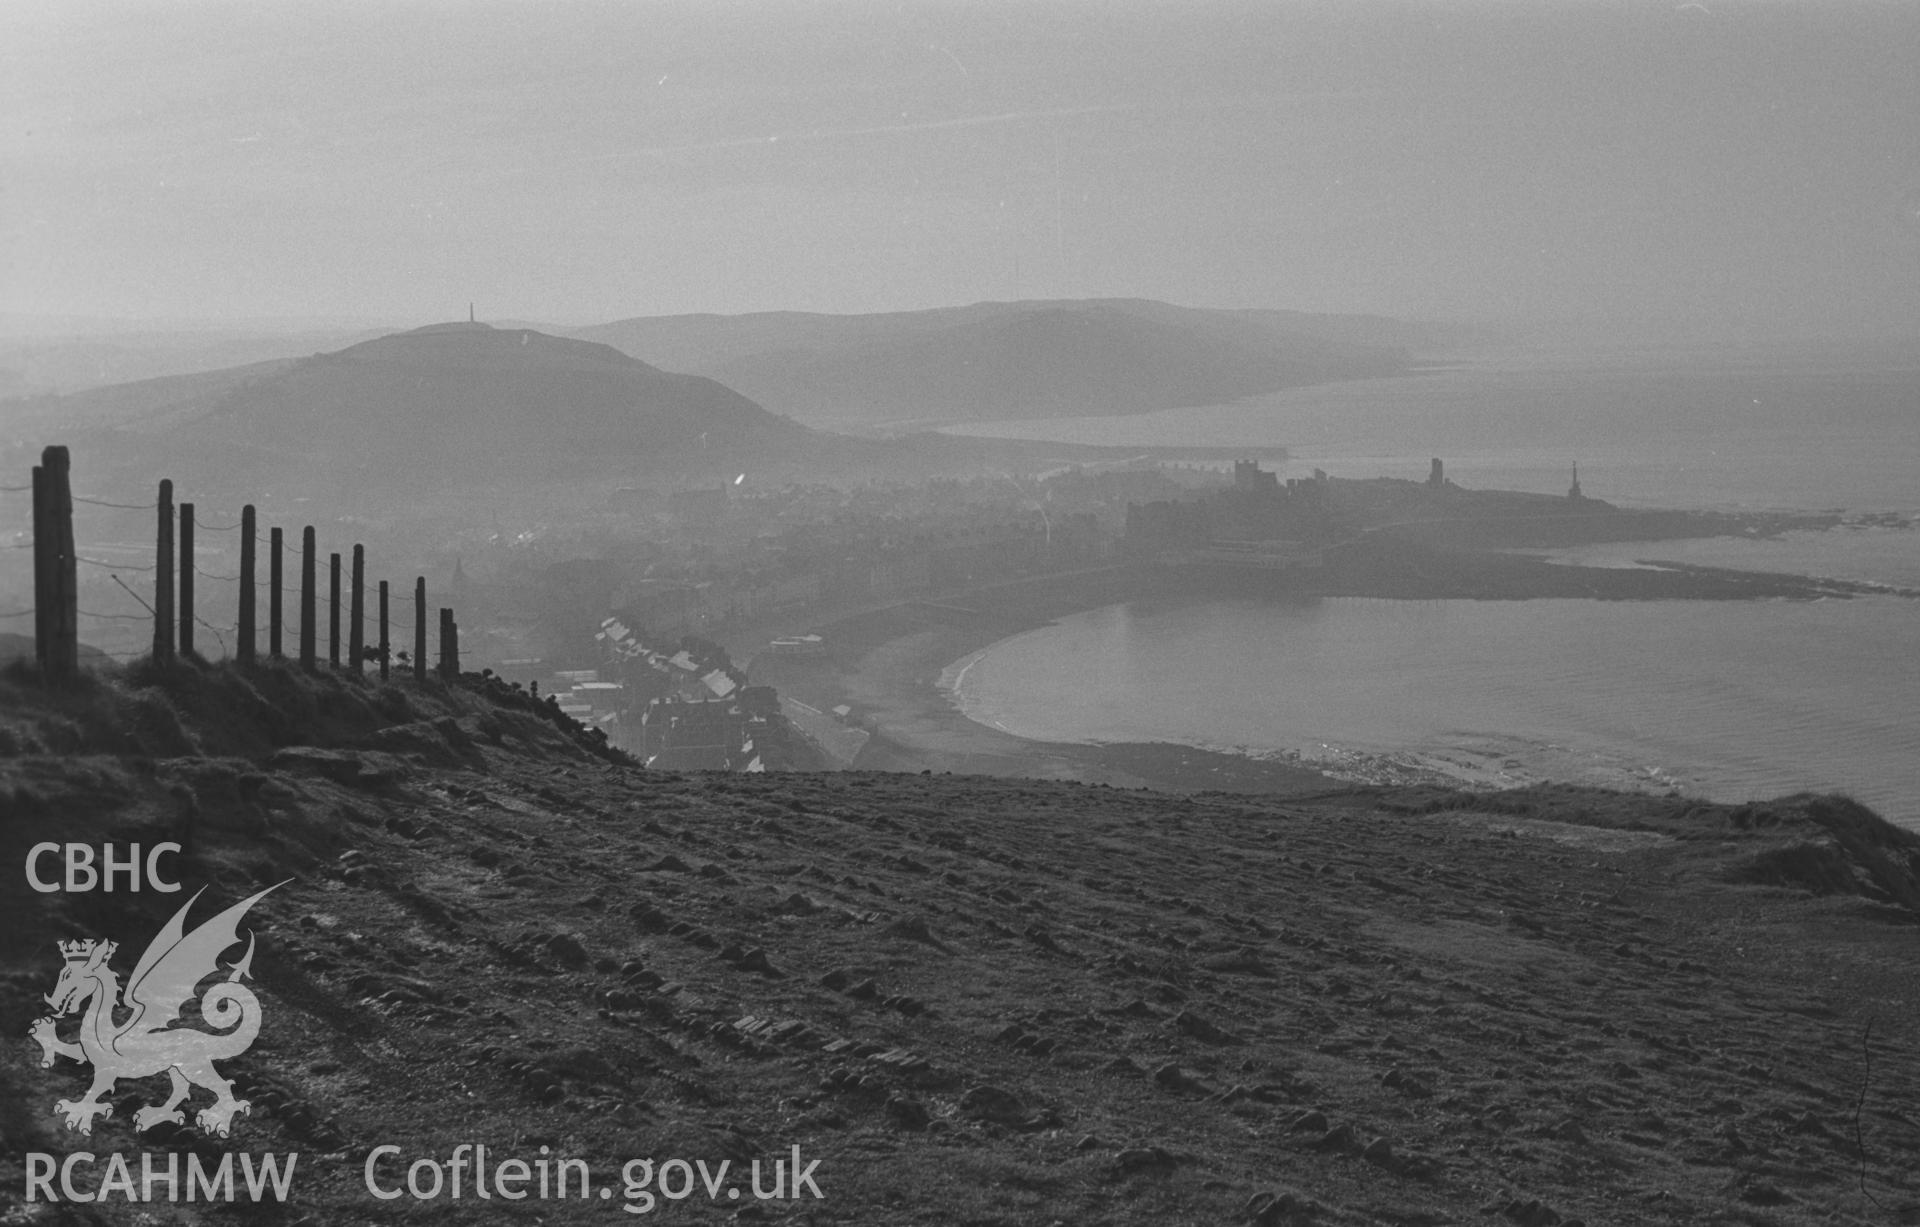 Black and White photograph showing view of Aberystwyth from the top of Constitution Hill. Photographed by Arthur Chater in December 1962, from Grid Reference SN 584 828, looking south.